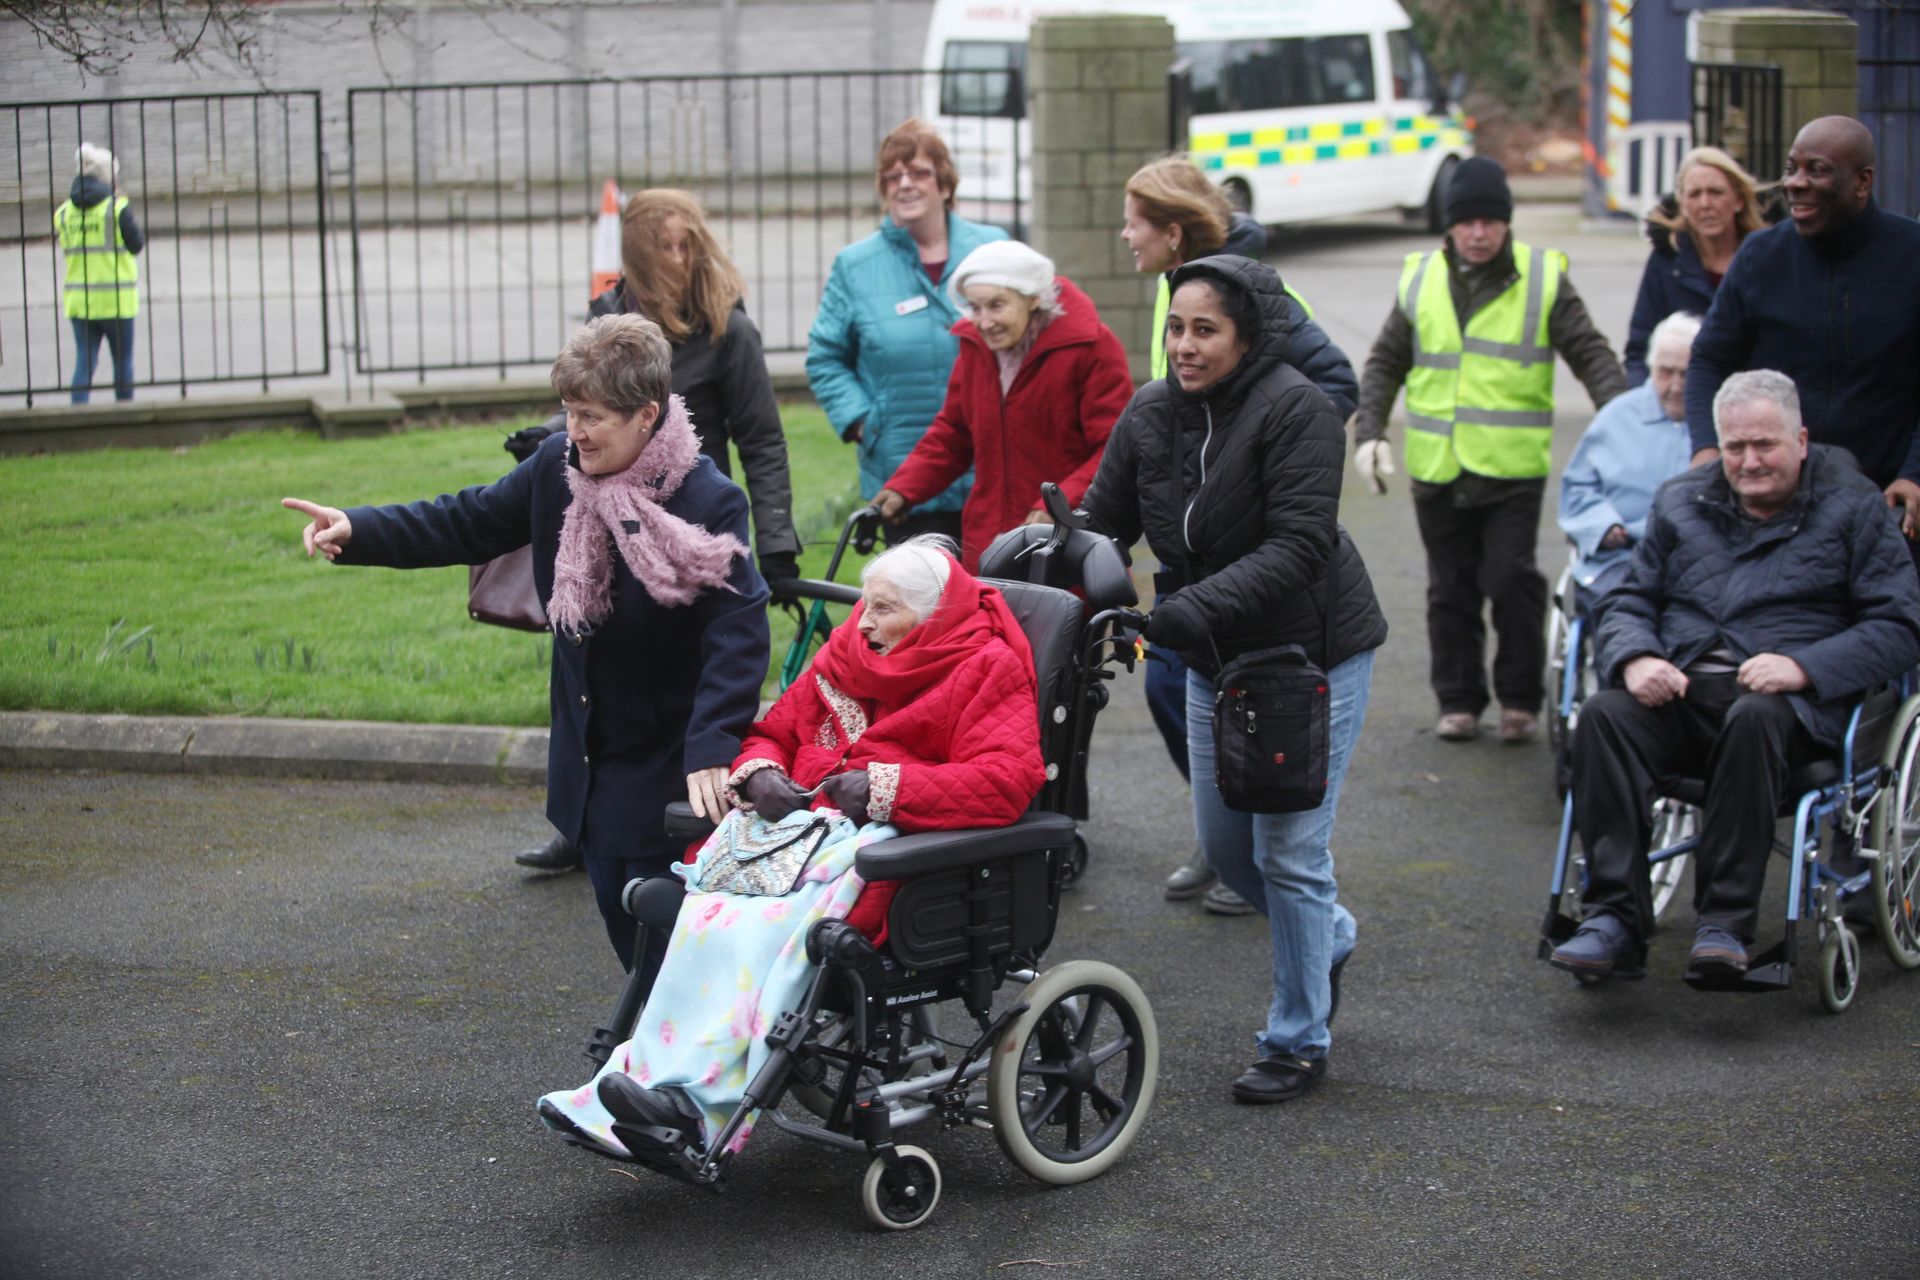 A group of people are walking with a woman in a wheelchair.